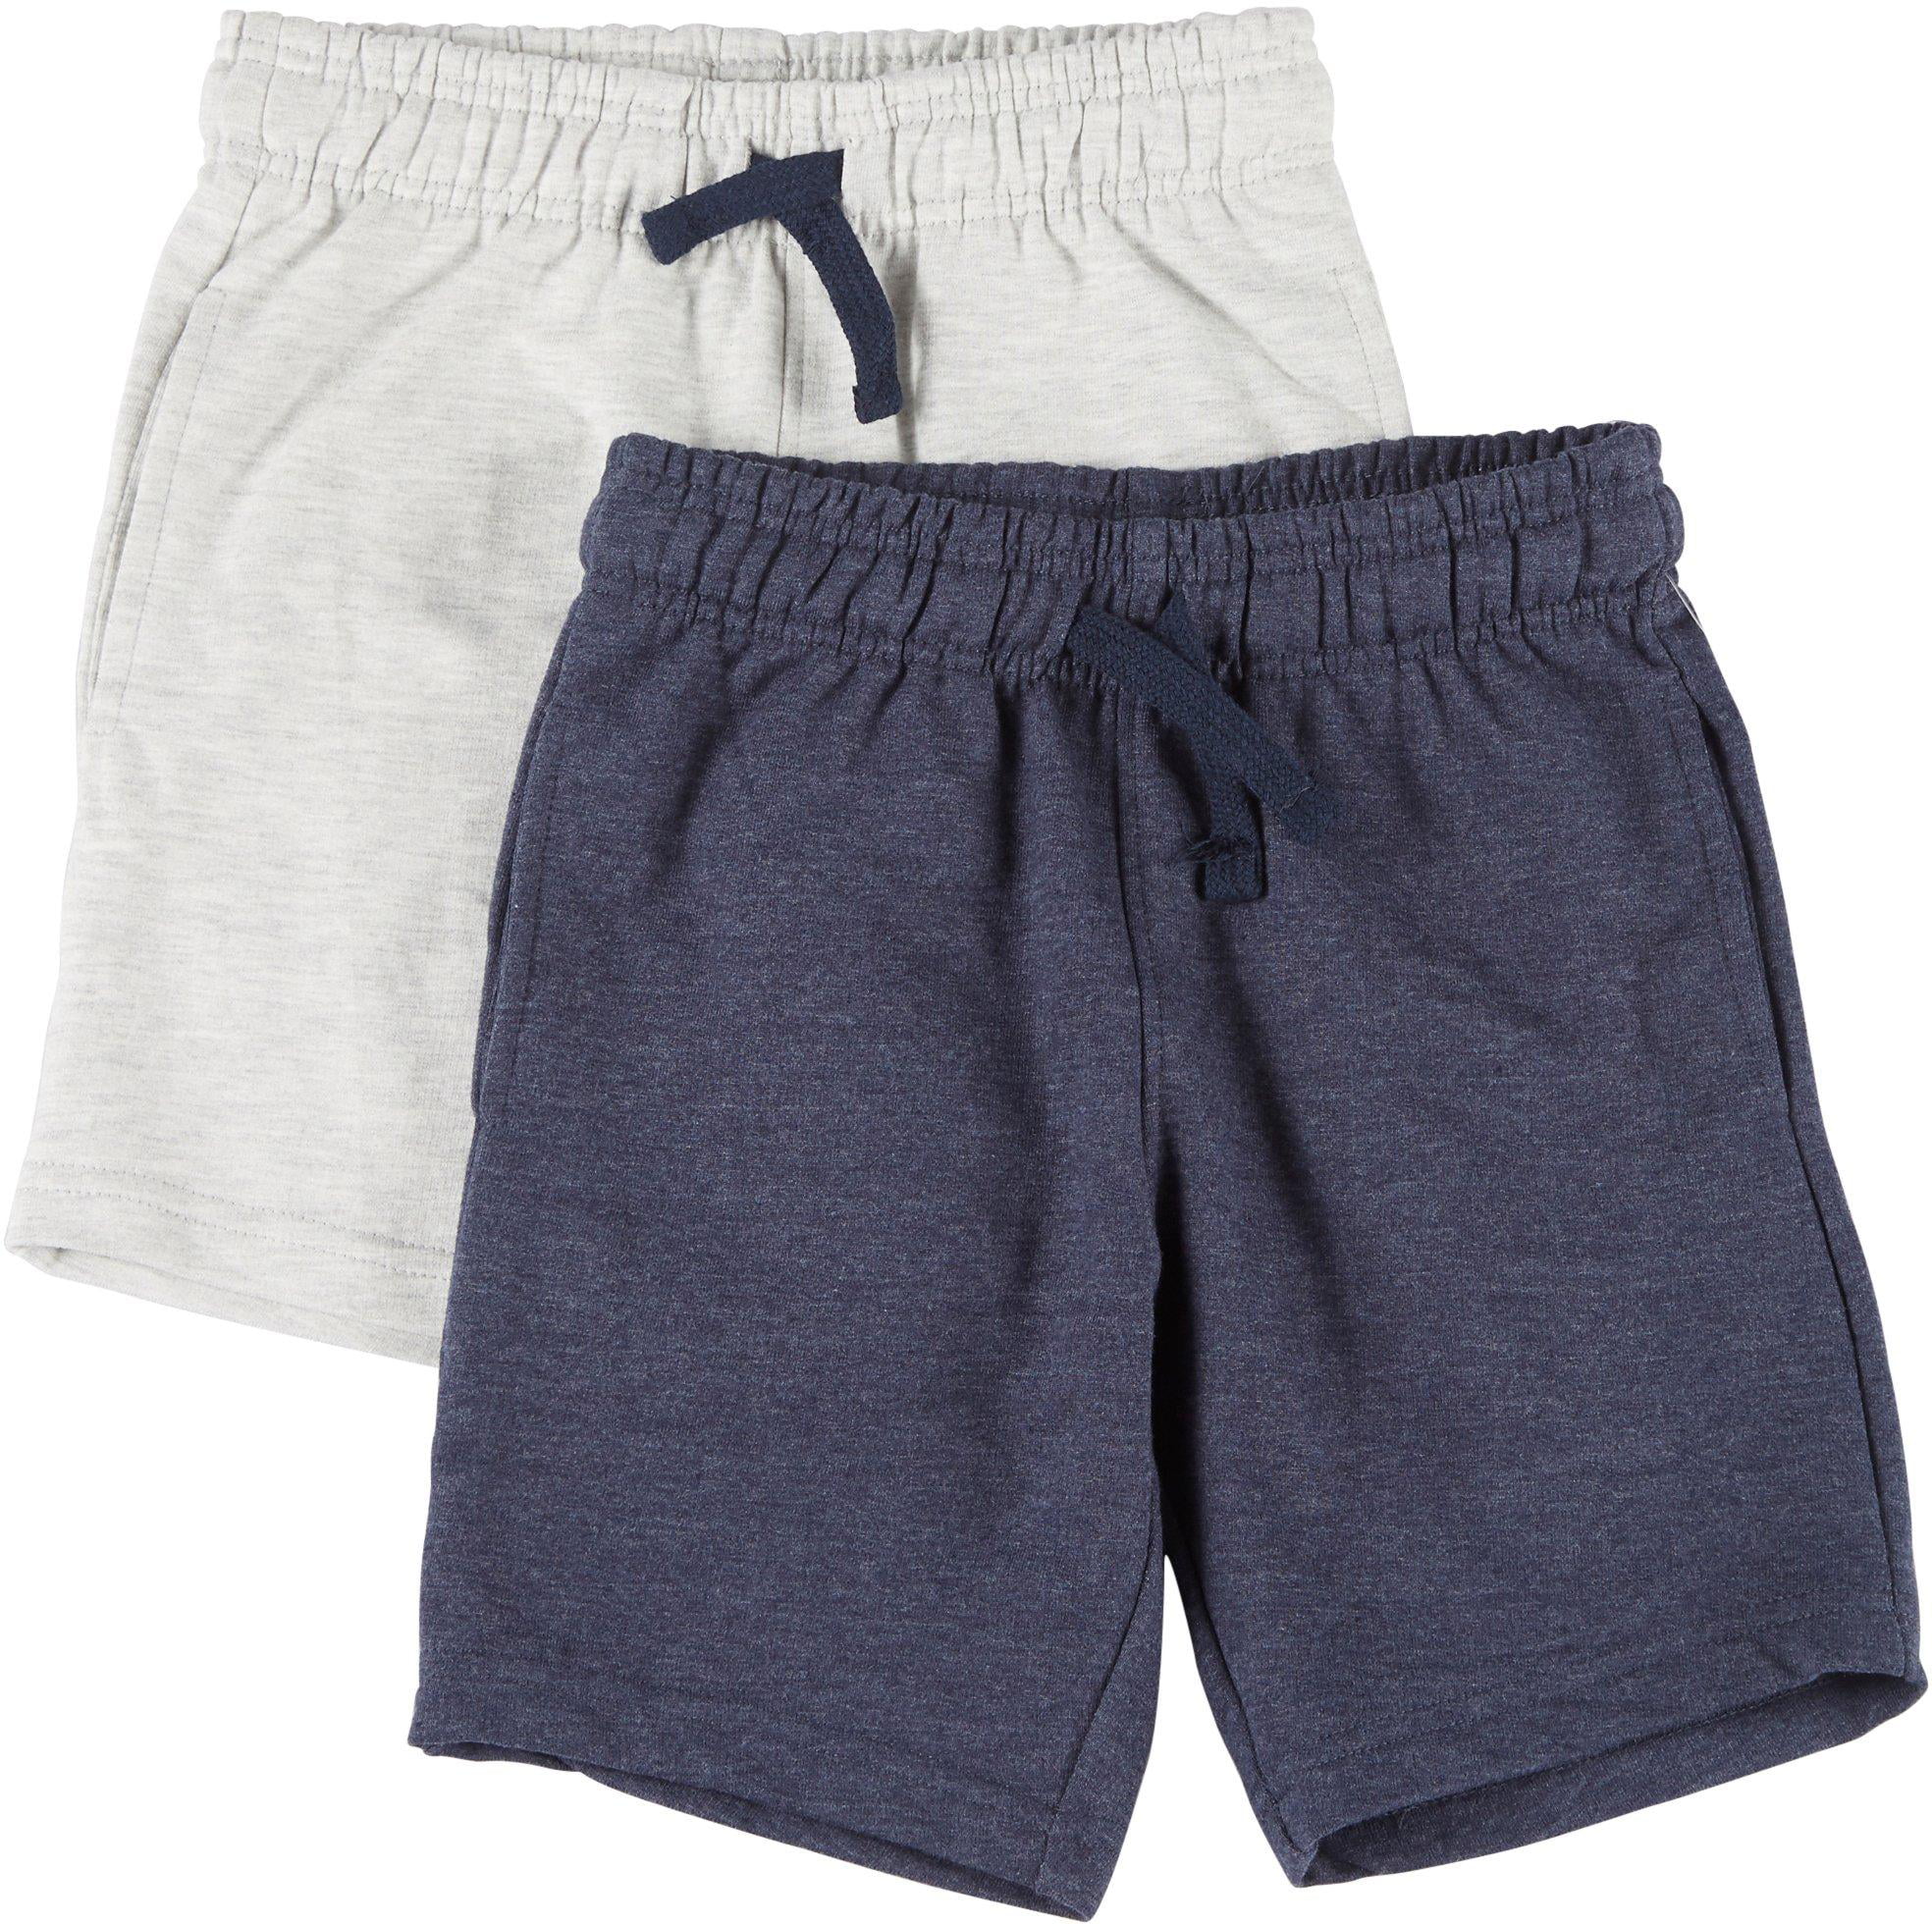 Carters Toddler Boys Solid Chambray Pull-On Shorts 5T Denim Blue 